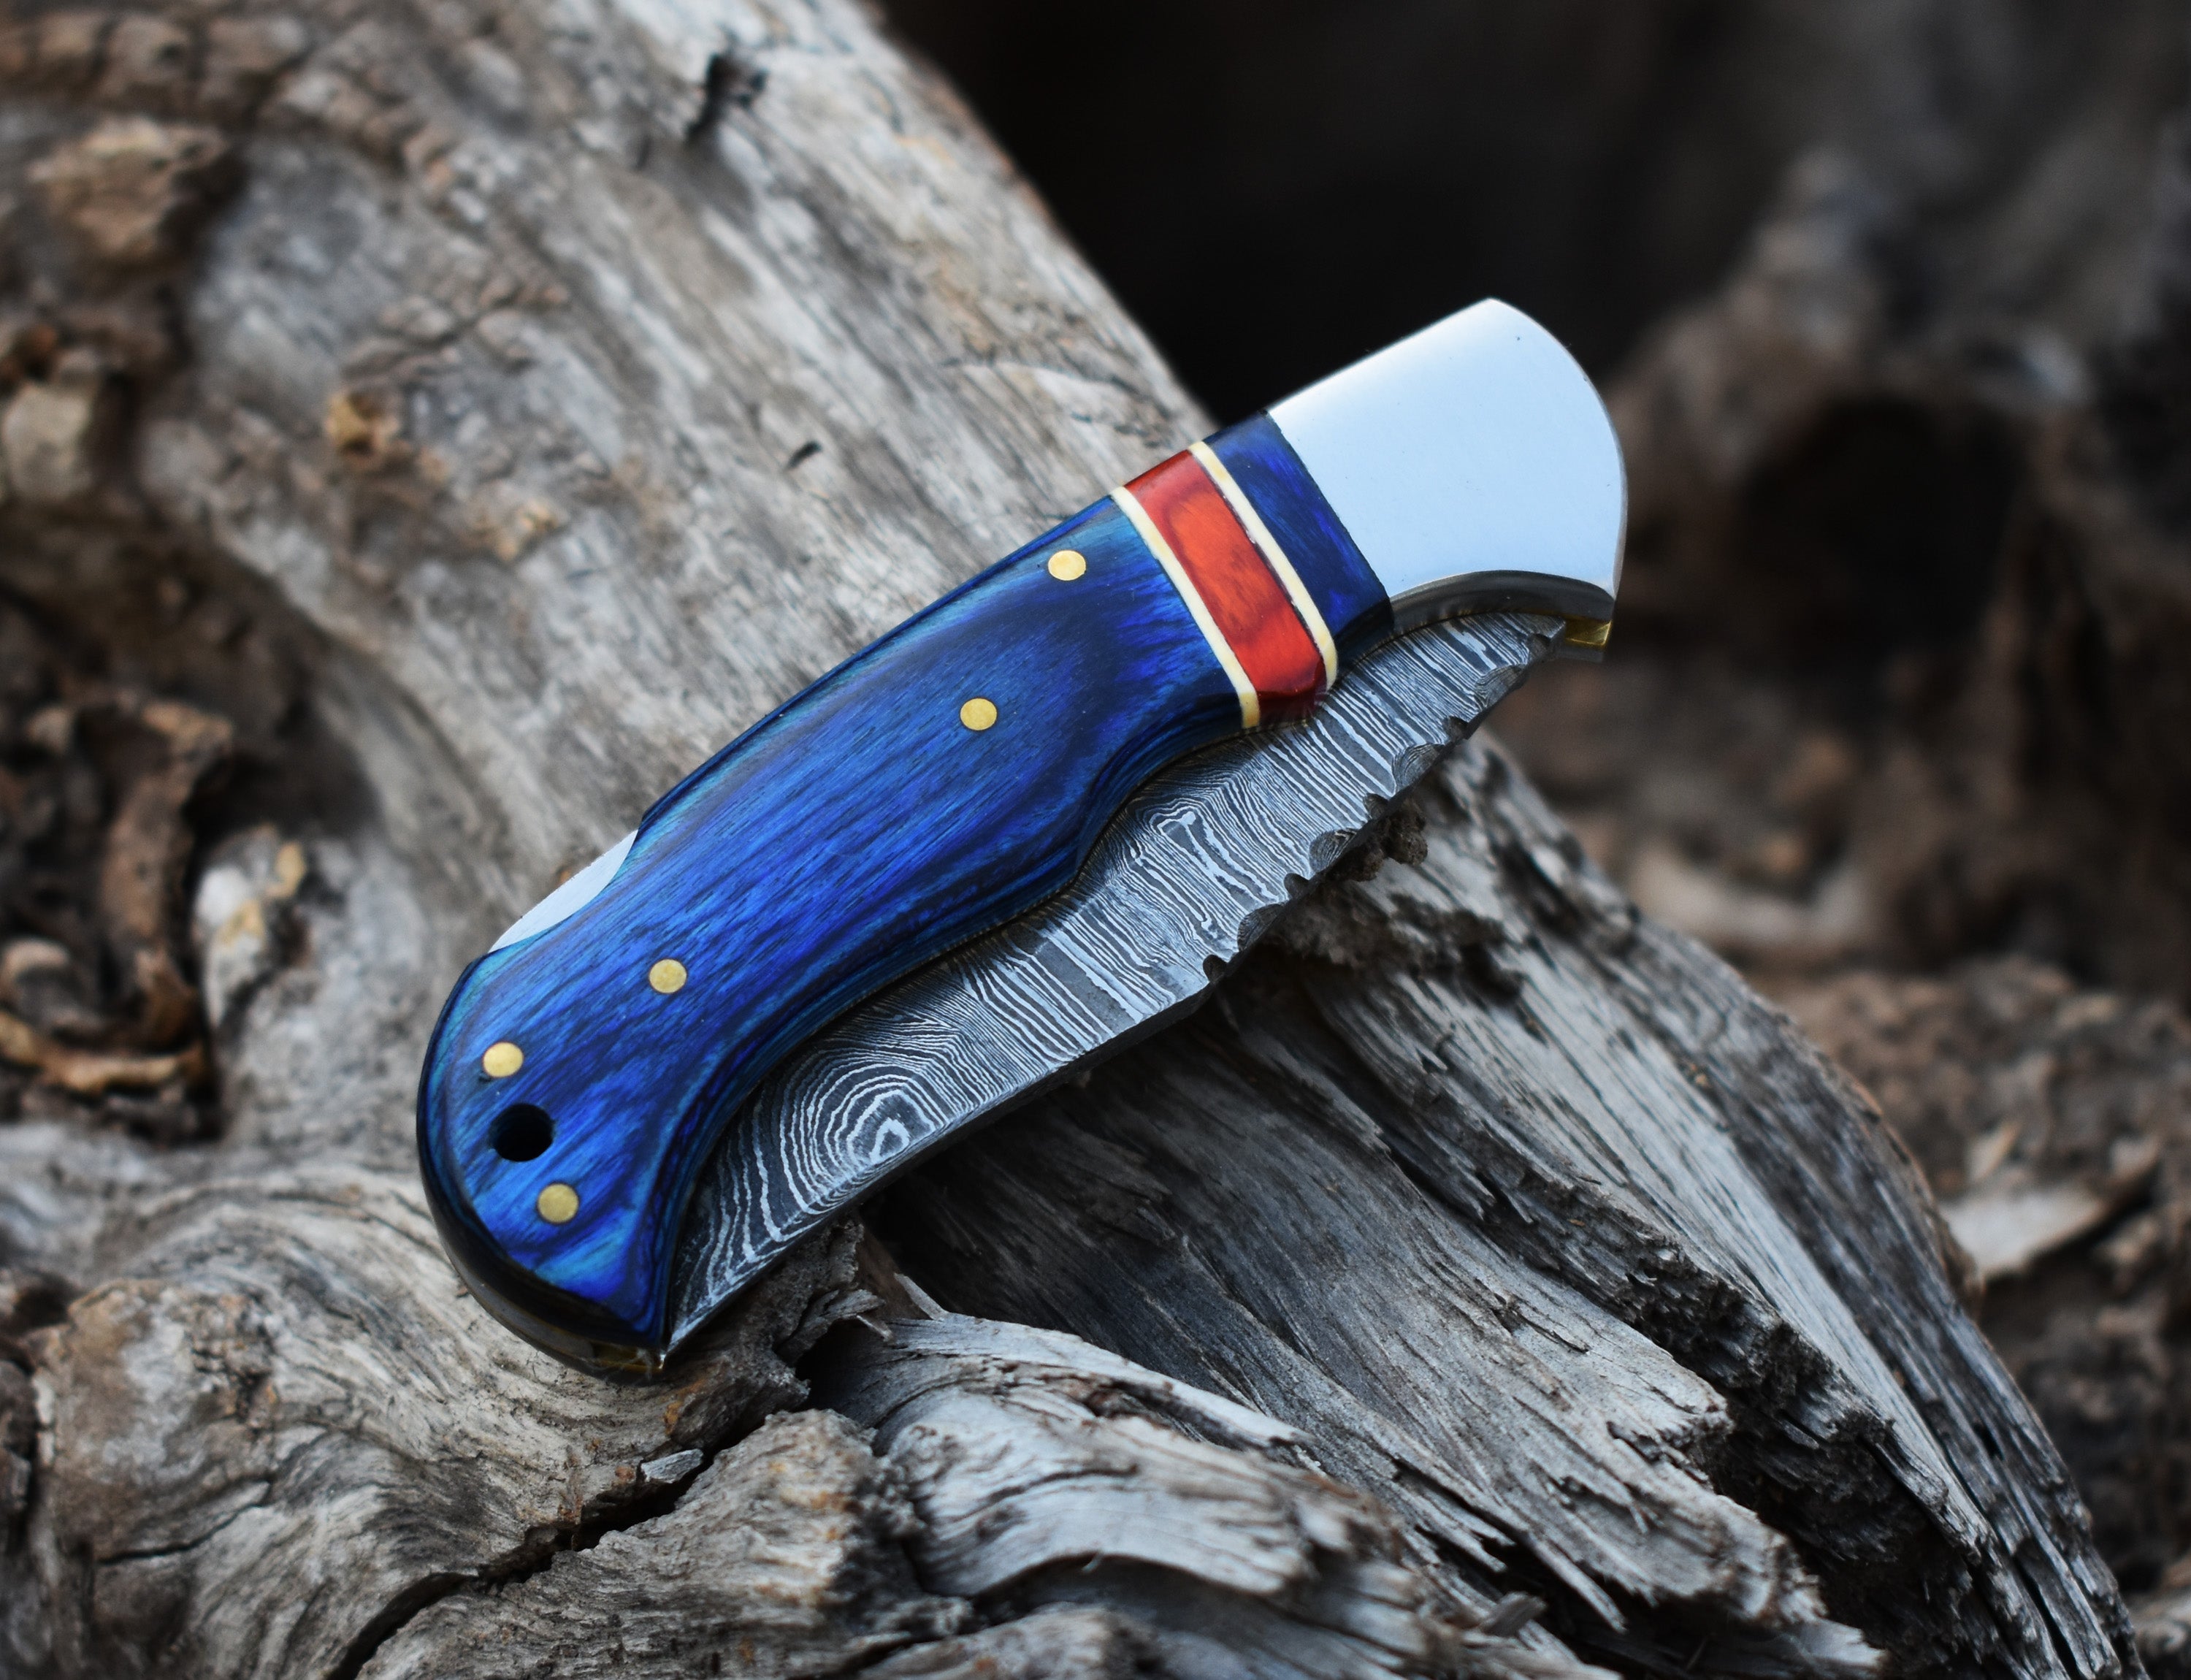 6.5" Handmade Damascus Steel Folding Knife Blue & Grey Handle Back Lock Pocket Knife With Leather Pouch Personalized Gift for Men.